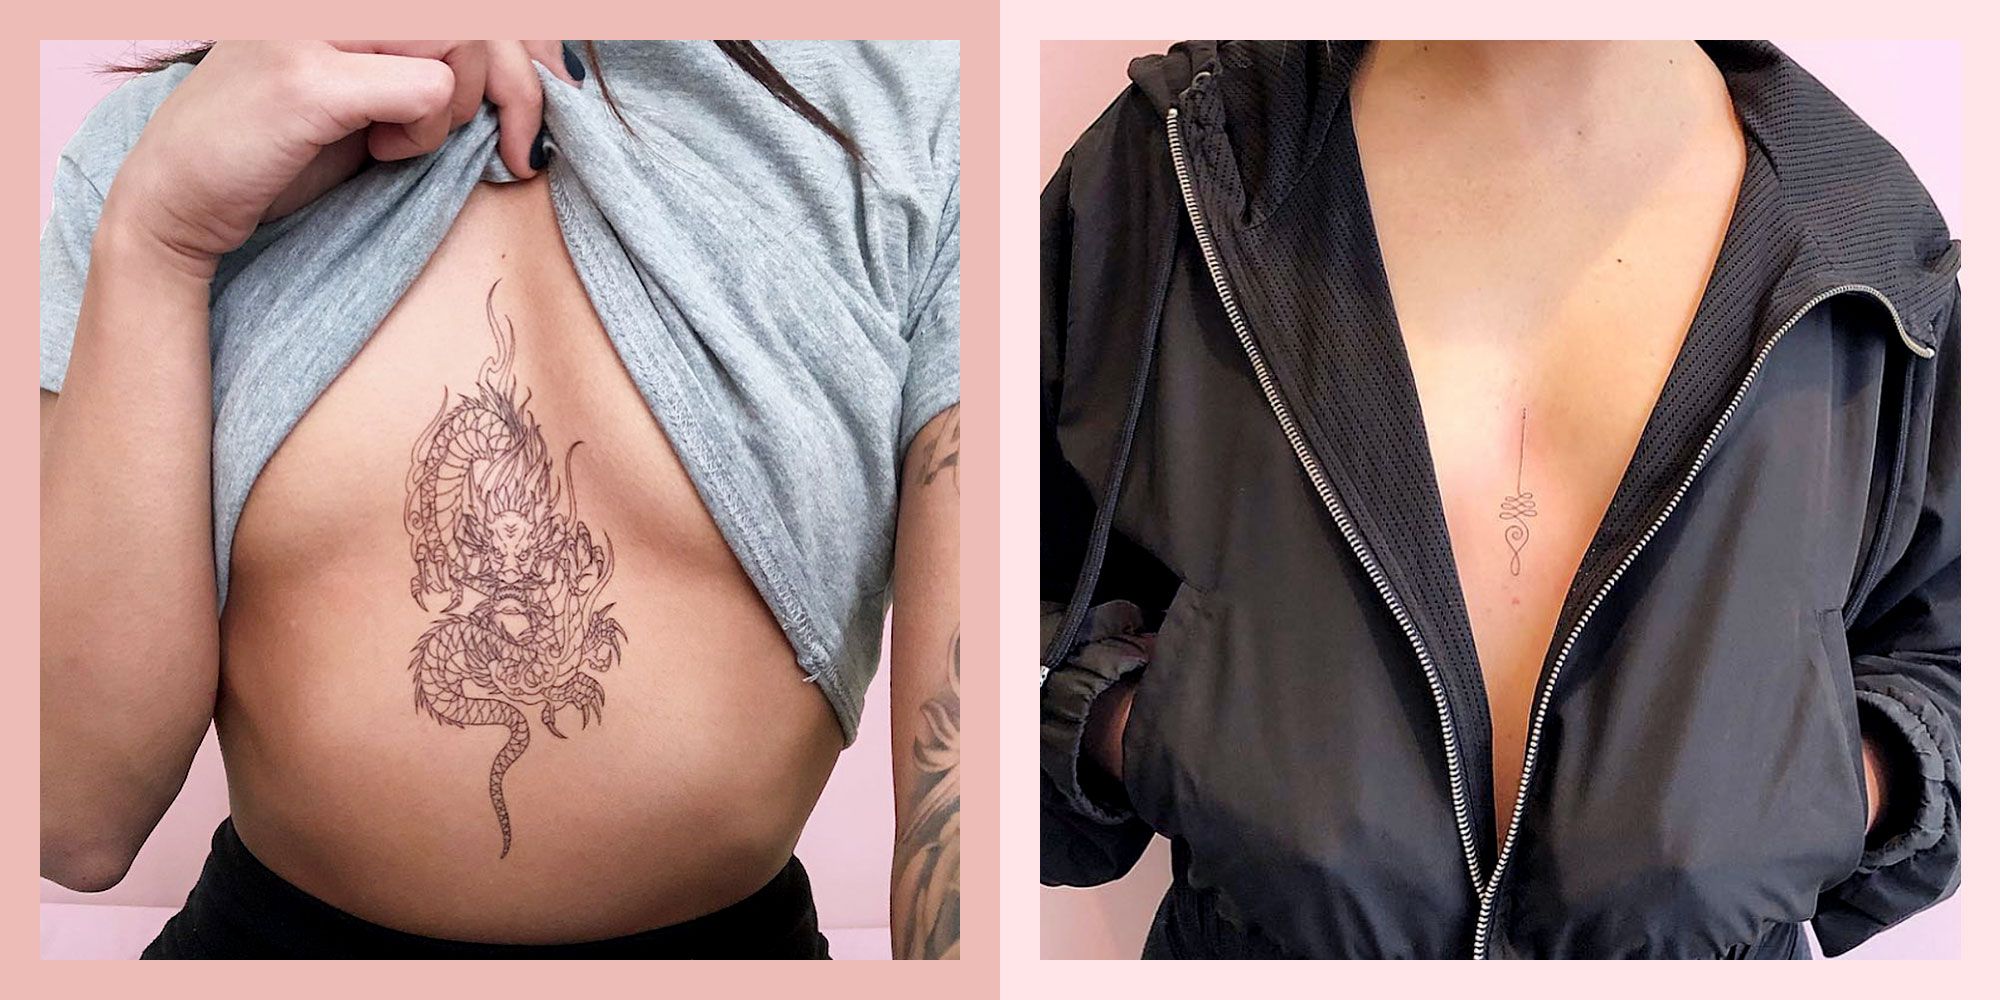 ariana sievers recommends between the boobs tattoo pic